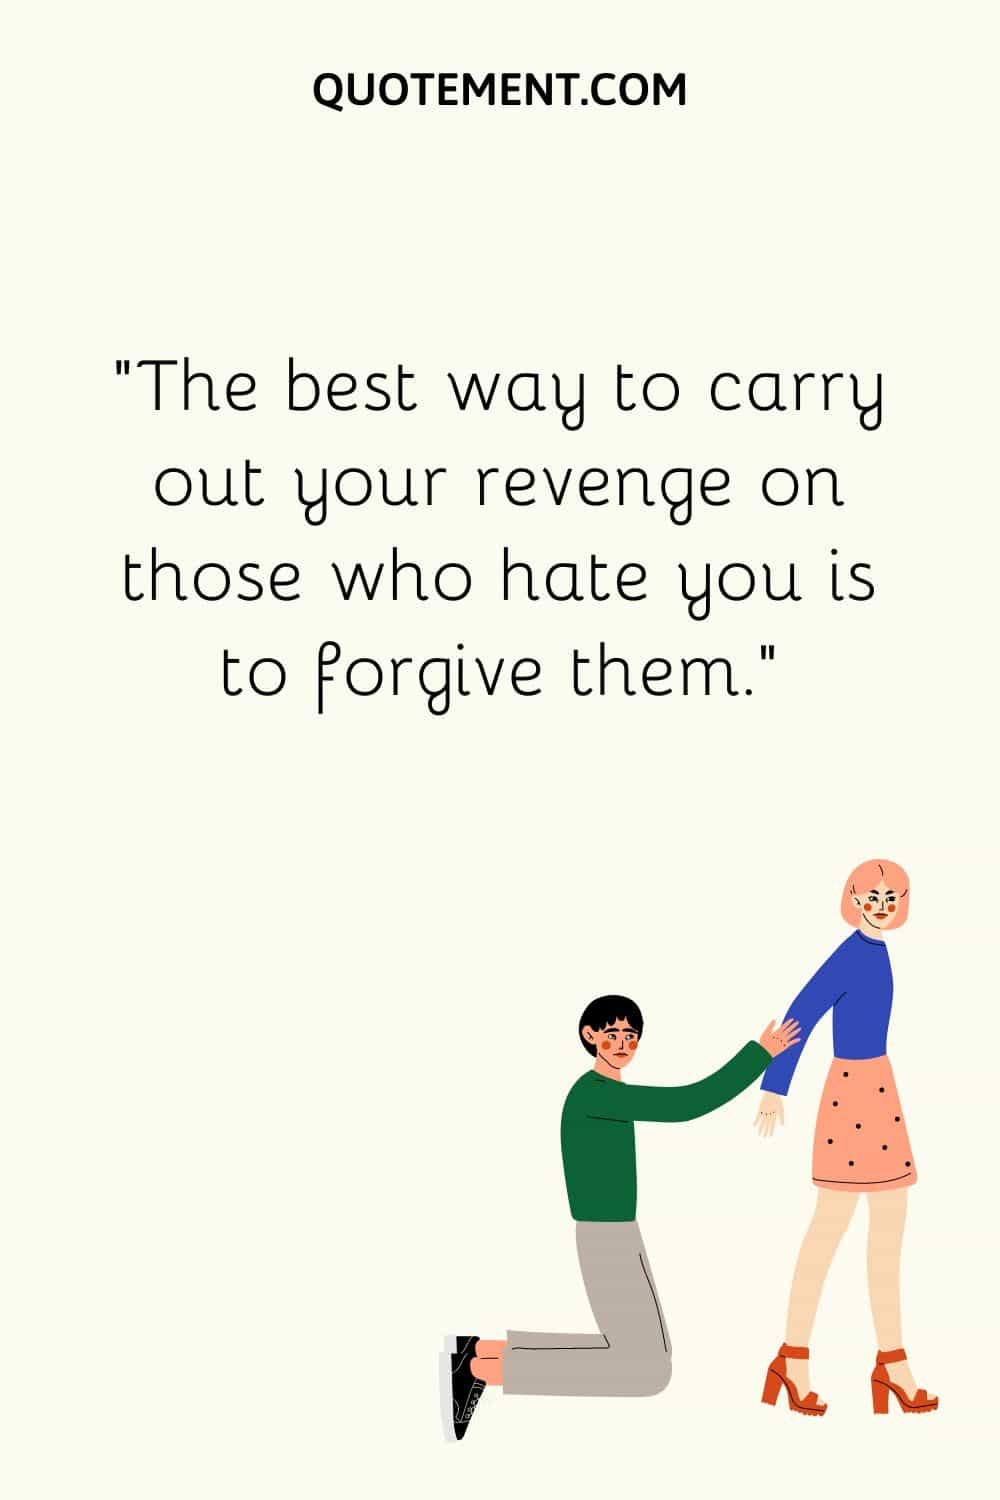 The best way to carry out your revenge on those who hate you is to forgive them